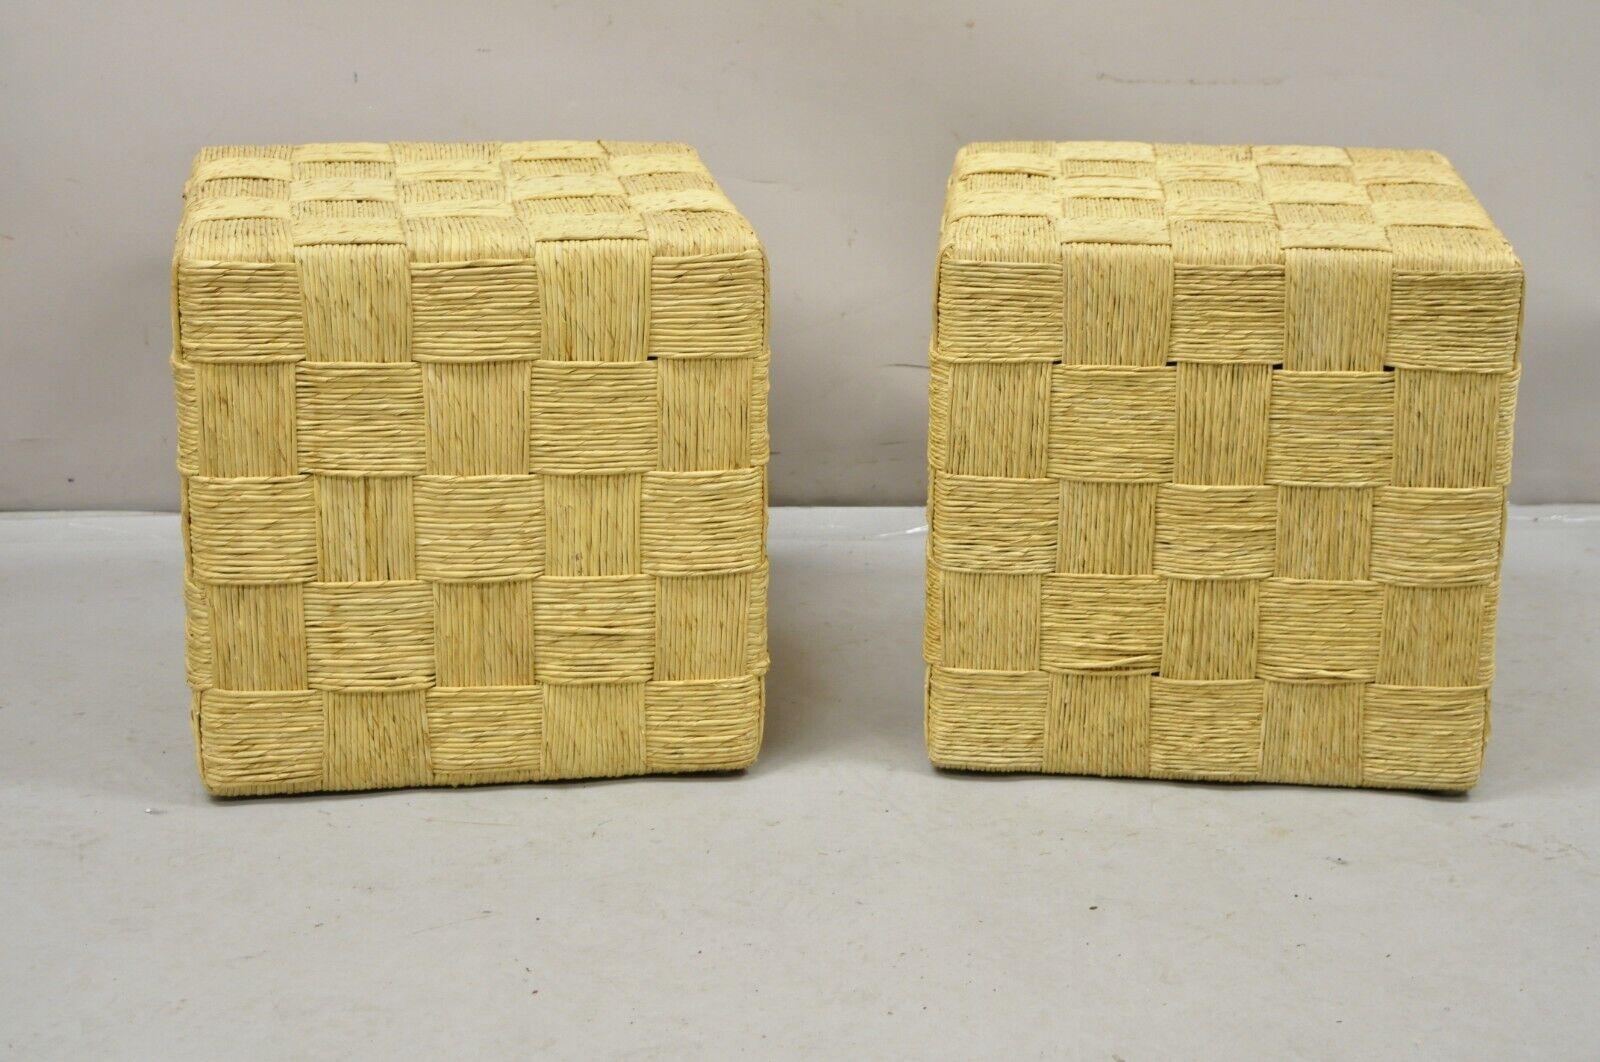 Decorator Modern Woven Rattan Rope Cord Cube Ottoman Side Table - a Pair. Item featured is 21st Century Pre-owned. Measurements: 15.5